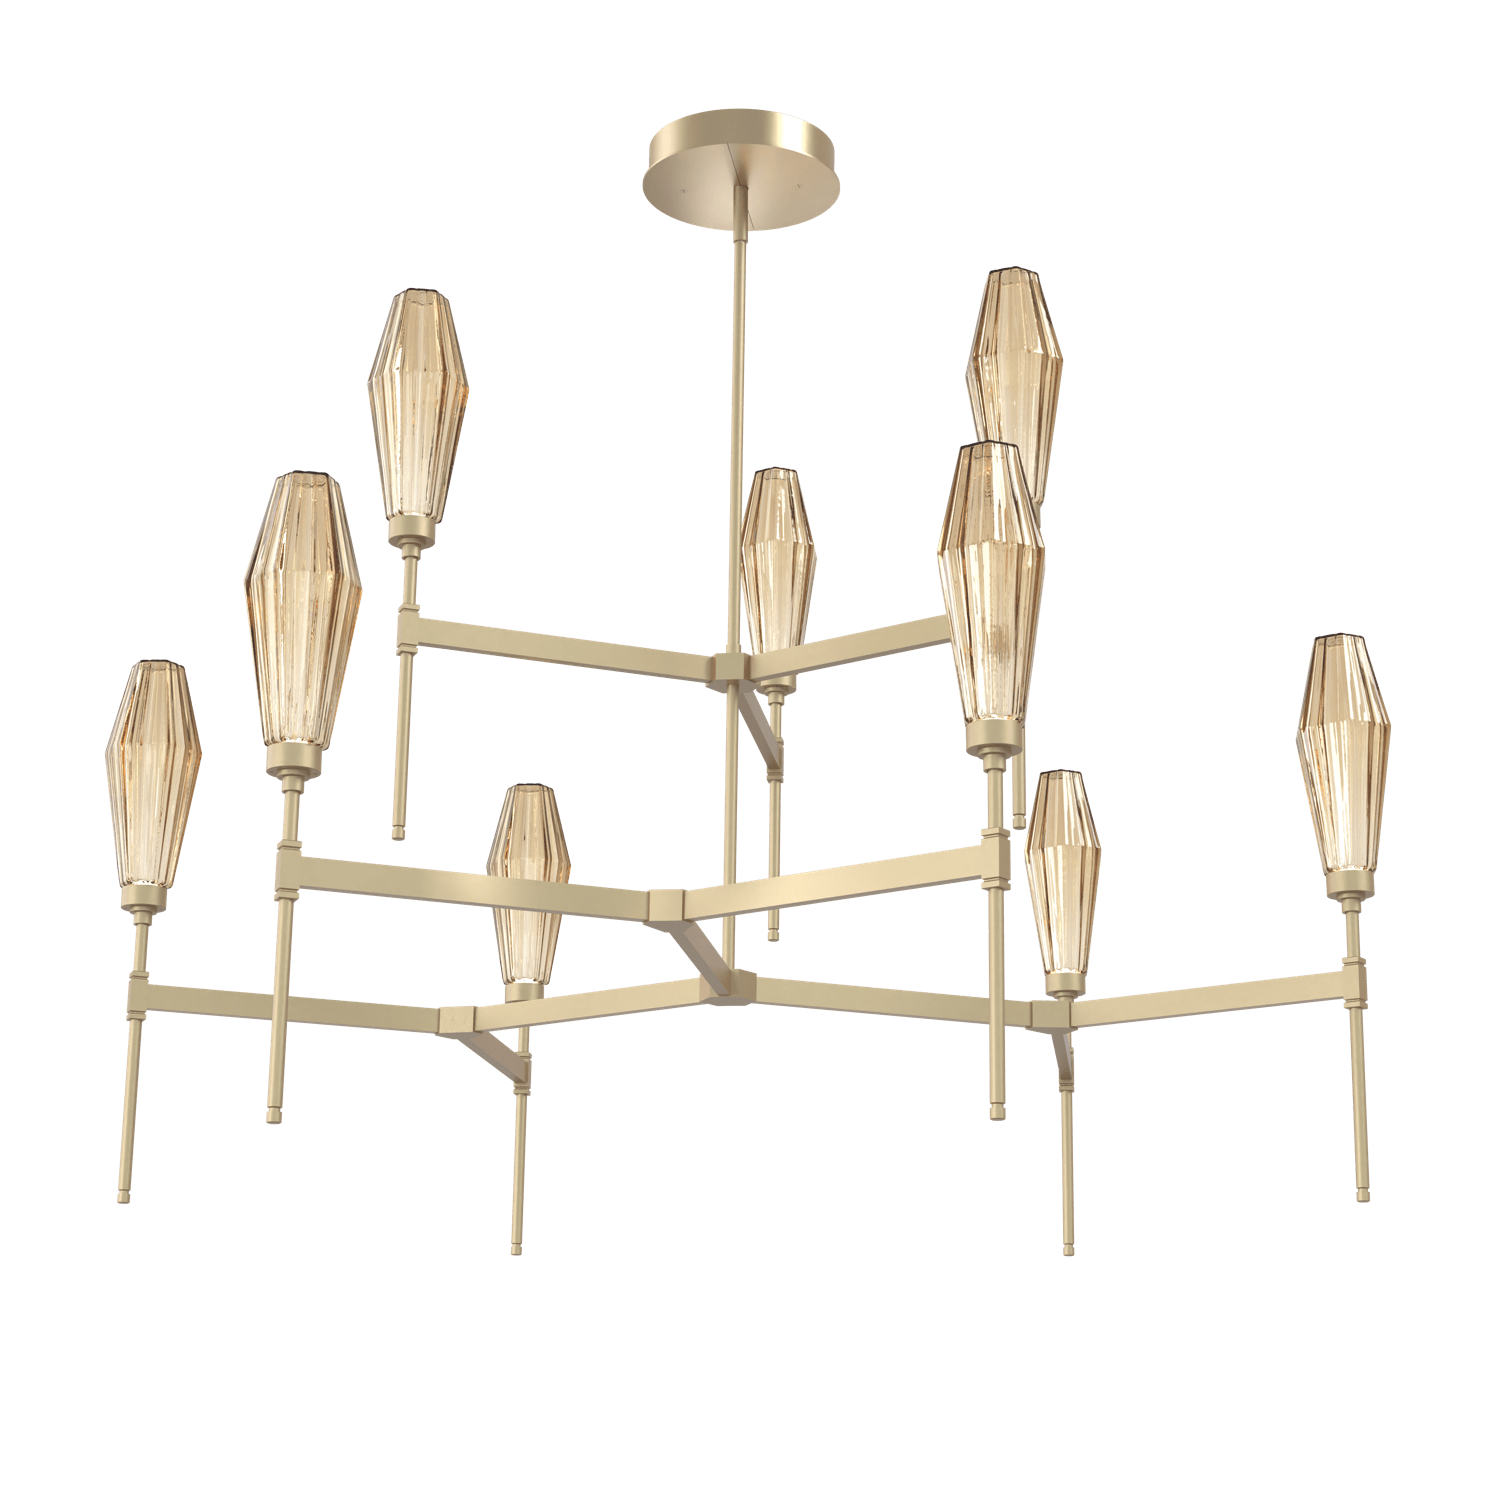 CHB0049-54-GB-RB-Hammerton-Studio-Aalto-54-inch-round-two-tier-belvedere-chandelier-with-gilded-brass-finish-and-optic-ribbed-bronze-glass-shades-and-LED-lamping